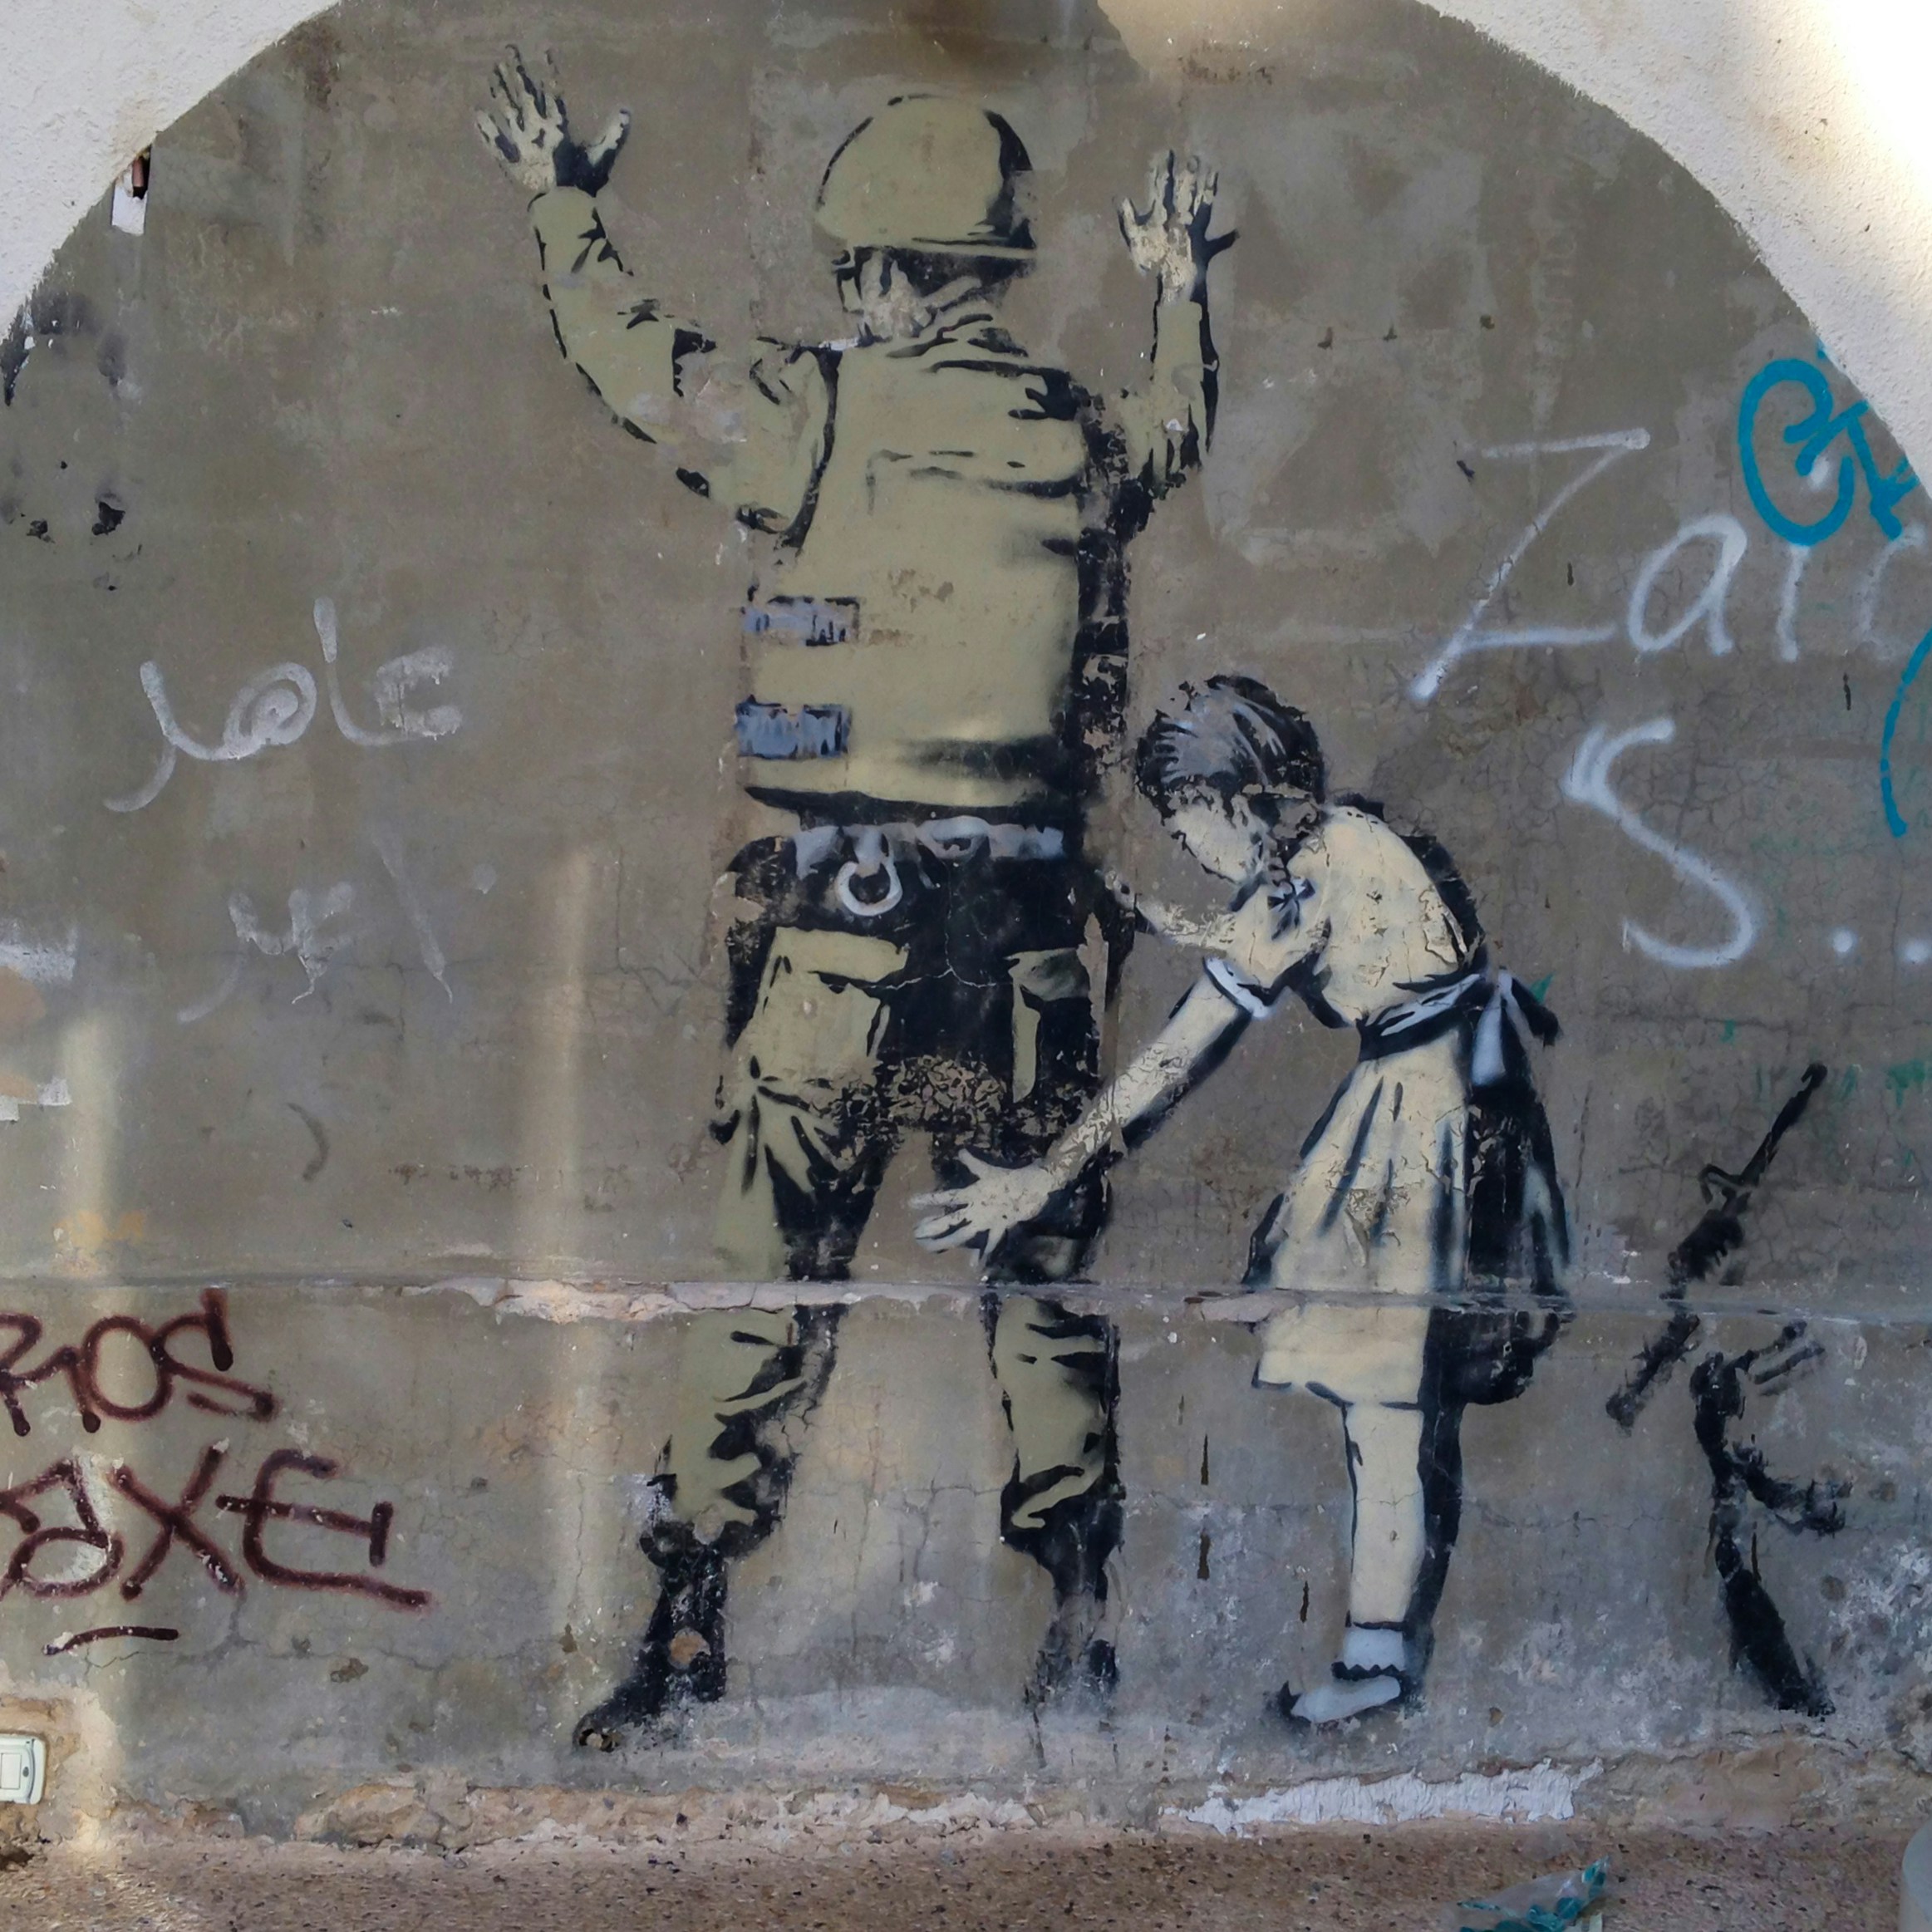 I was going through some old photos and came across this picture I took in 2014 in the West Bank (Palestine). This was done by Banksy, which I didn't learn until a couple years later. I paid a Palestinian cab driver to take me to their side of the wall and took a few photos of the \